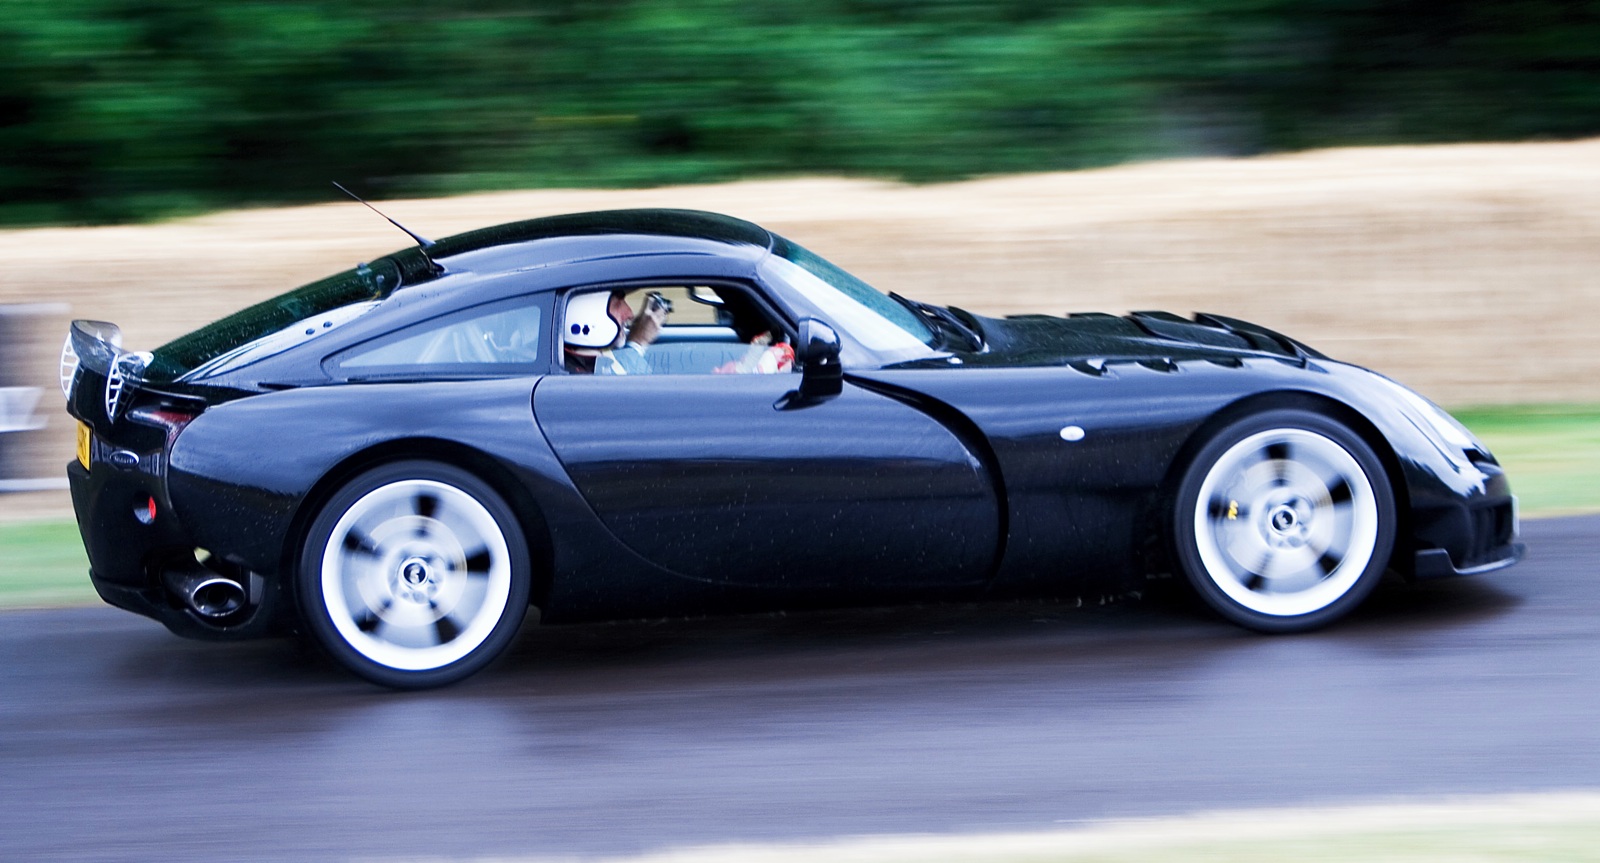 Wallpaper Of The Tvr Sagaris Pdfcast